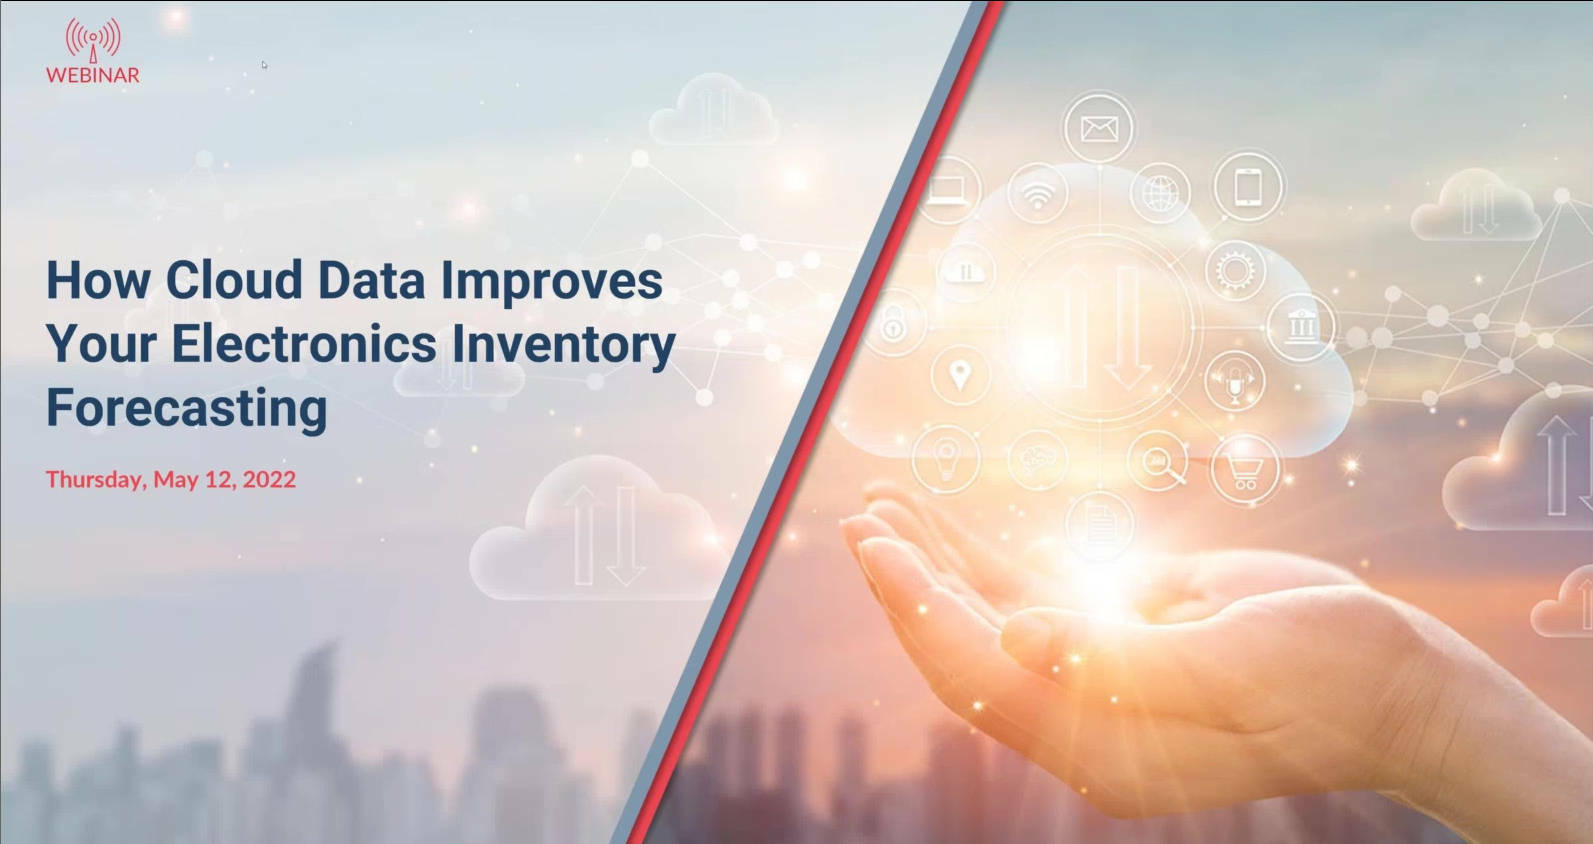 How Cloud Data Improves Your Electronics Inventory Forecasting